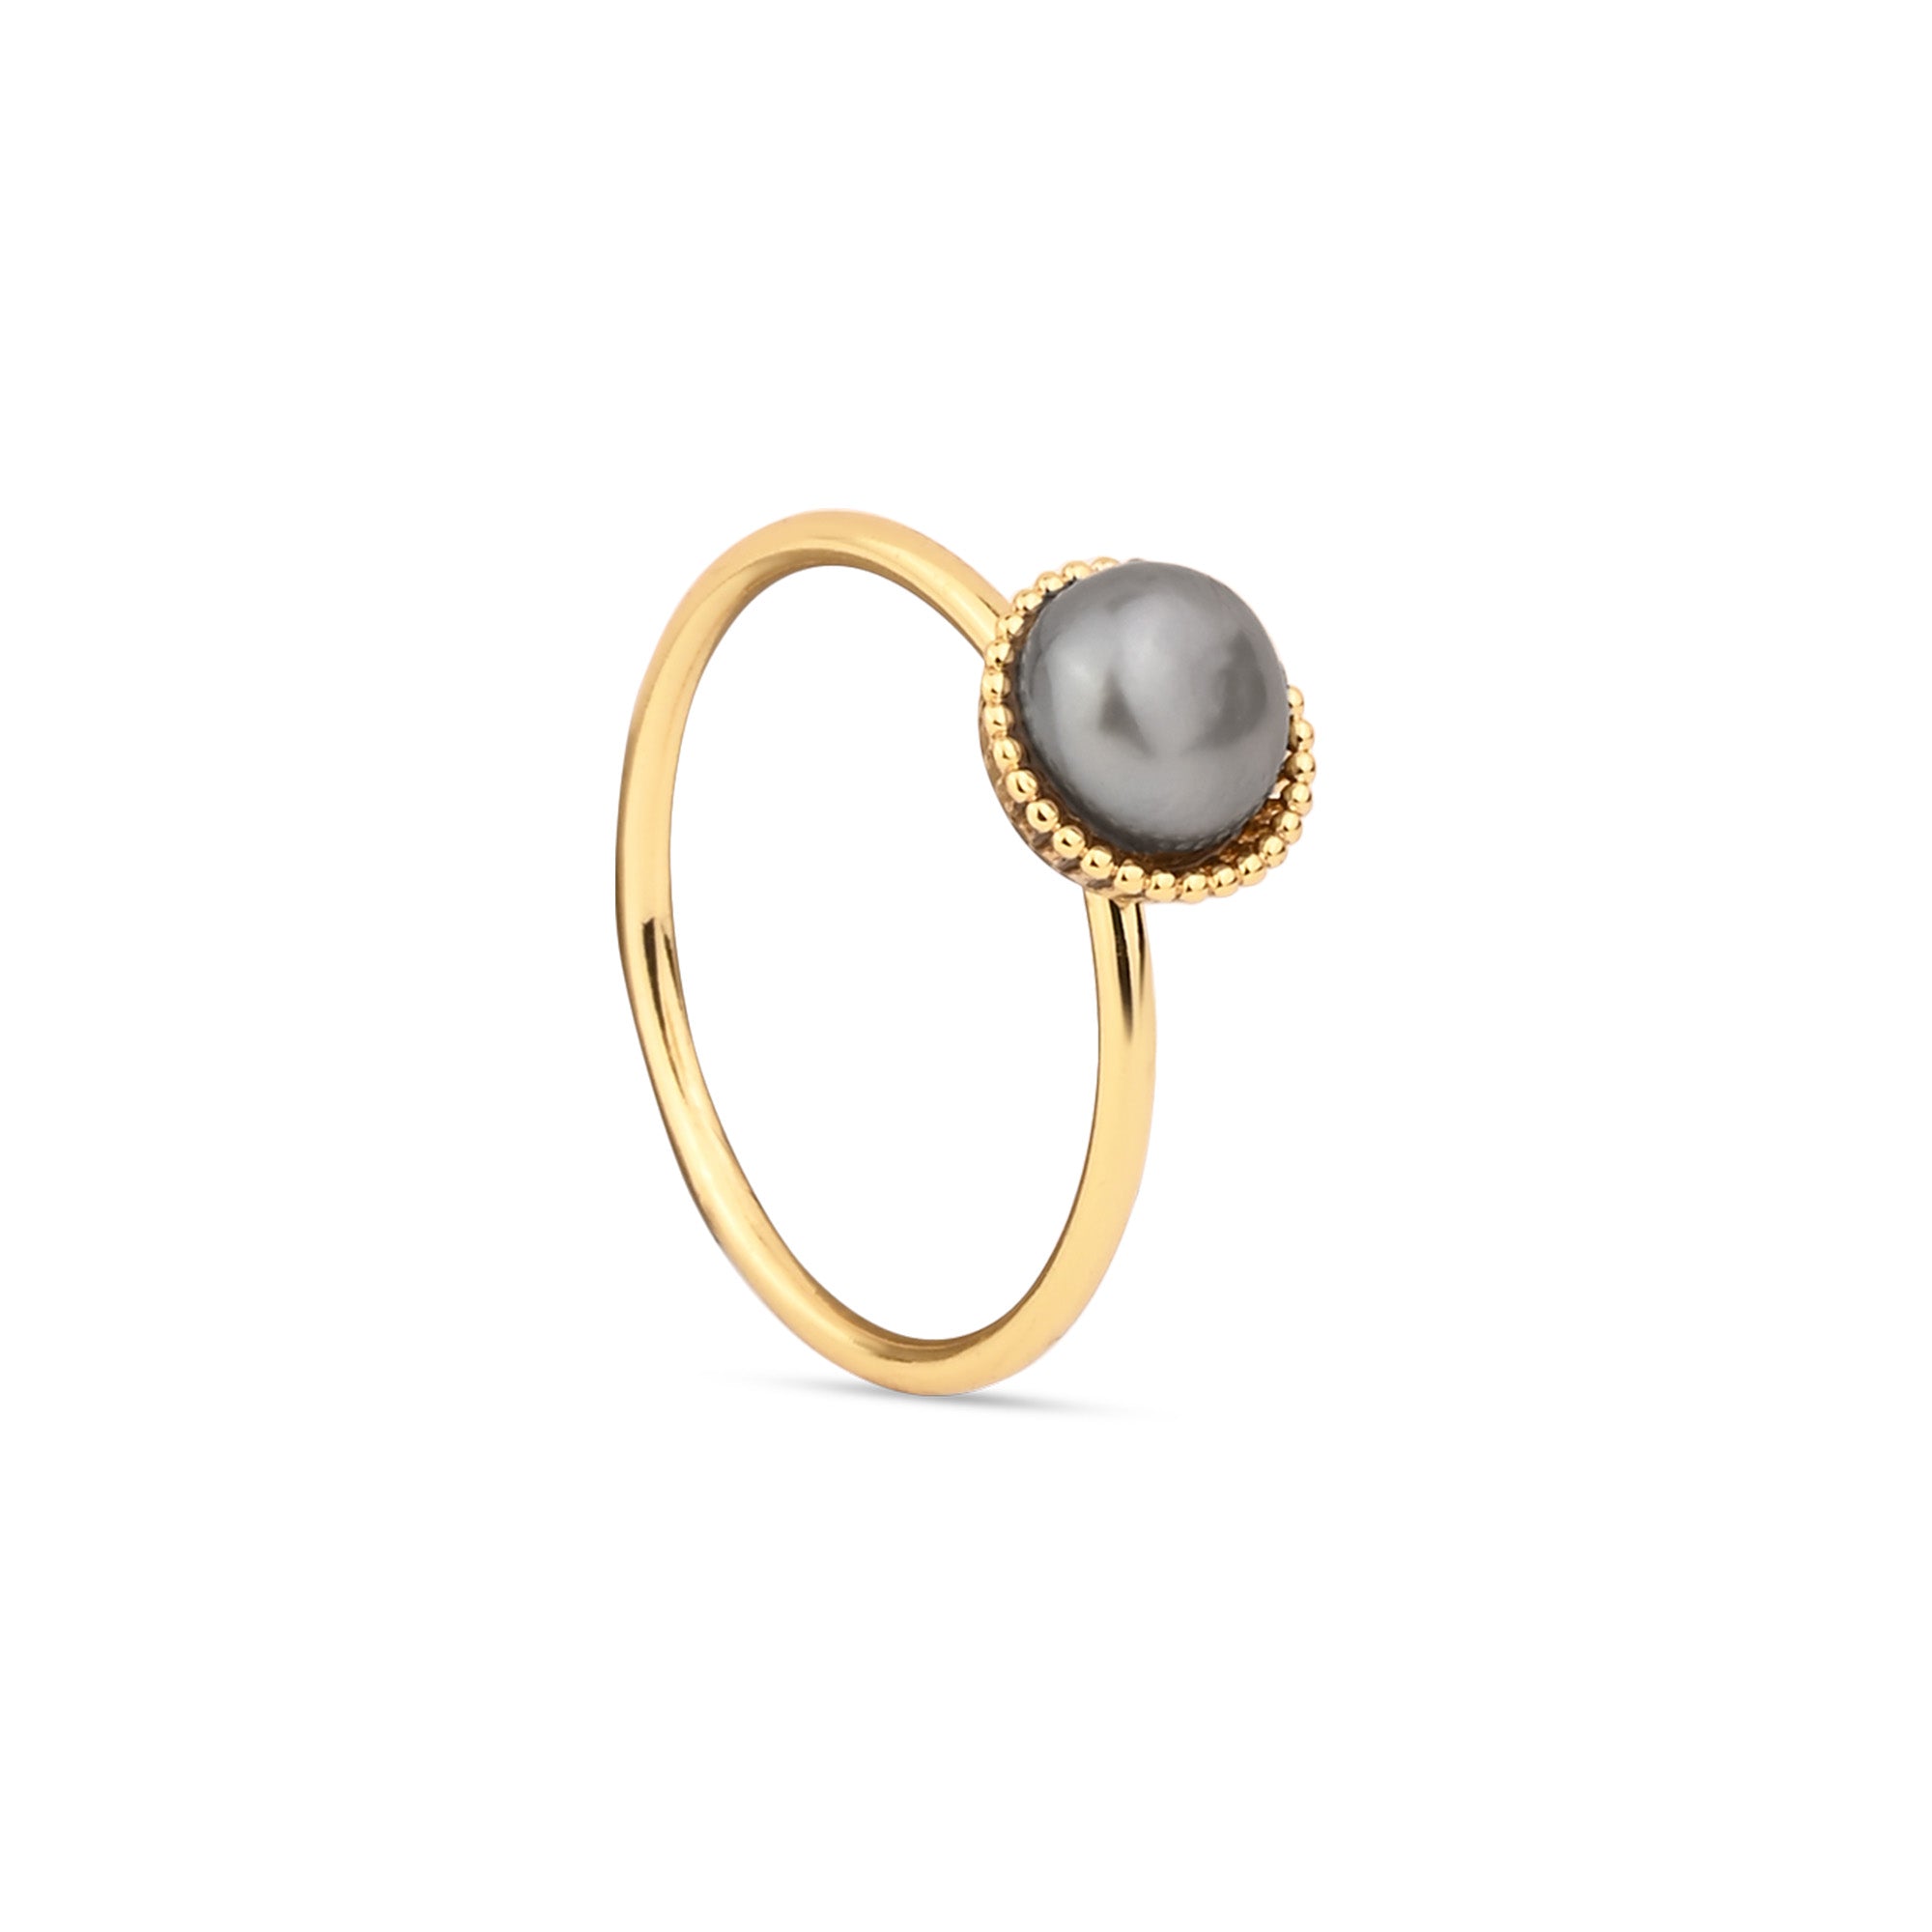 22K Gold Women's Ring With Pearl - 235-GR3713 in 3.450 Grams